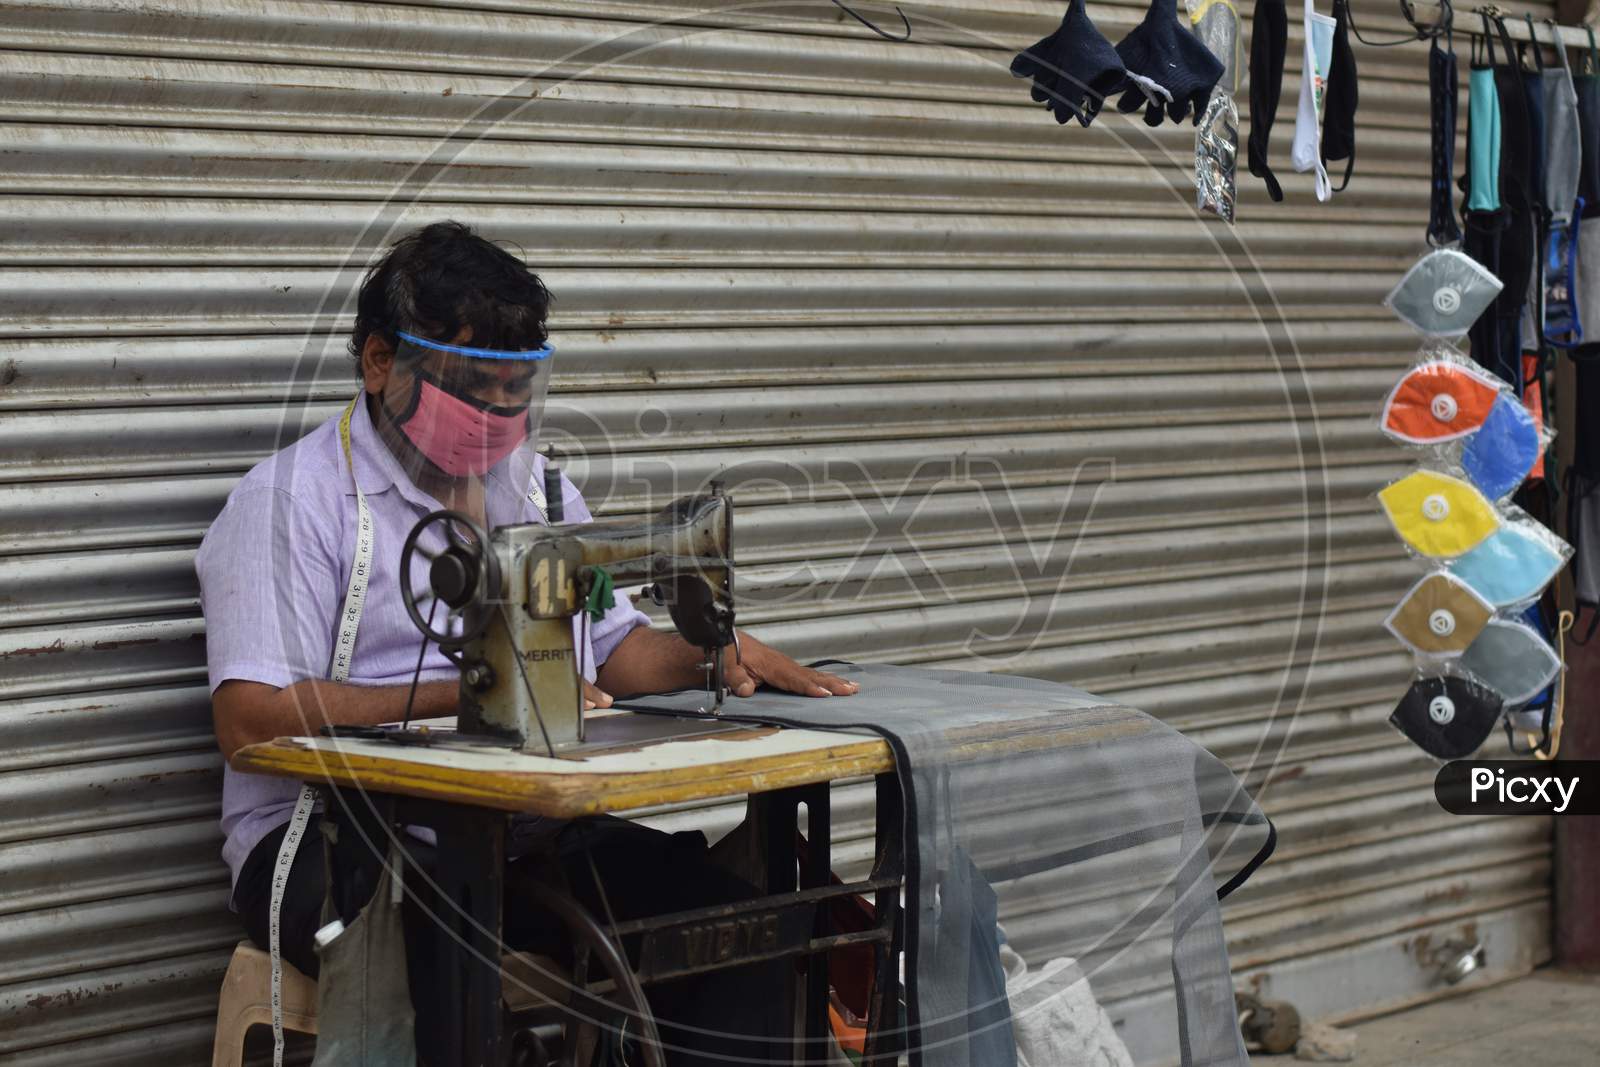 Hyderabad, Telangana, India. July-19-2020: Tailor Is To Repair, Make, And Adjust Clothes While His Wearing Protective Face Mask. Man With Safety Mask On His Face, Pandemic Concept